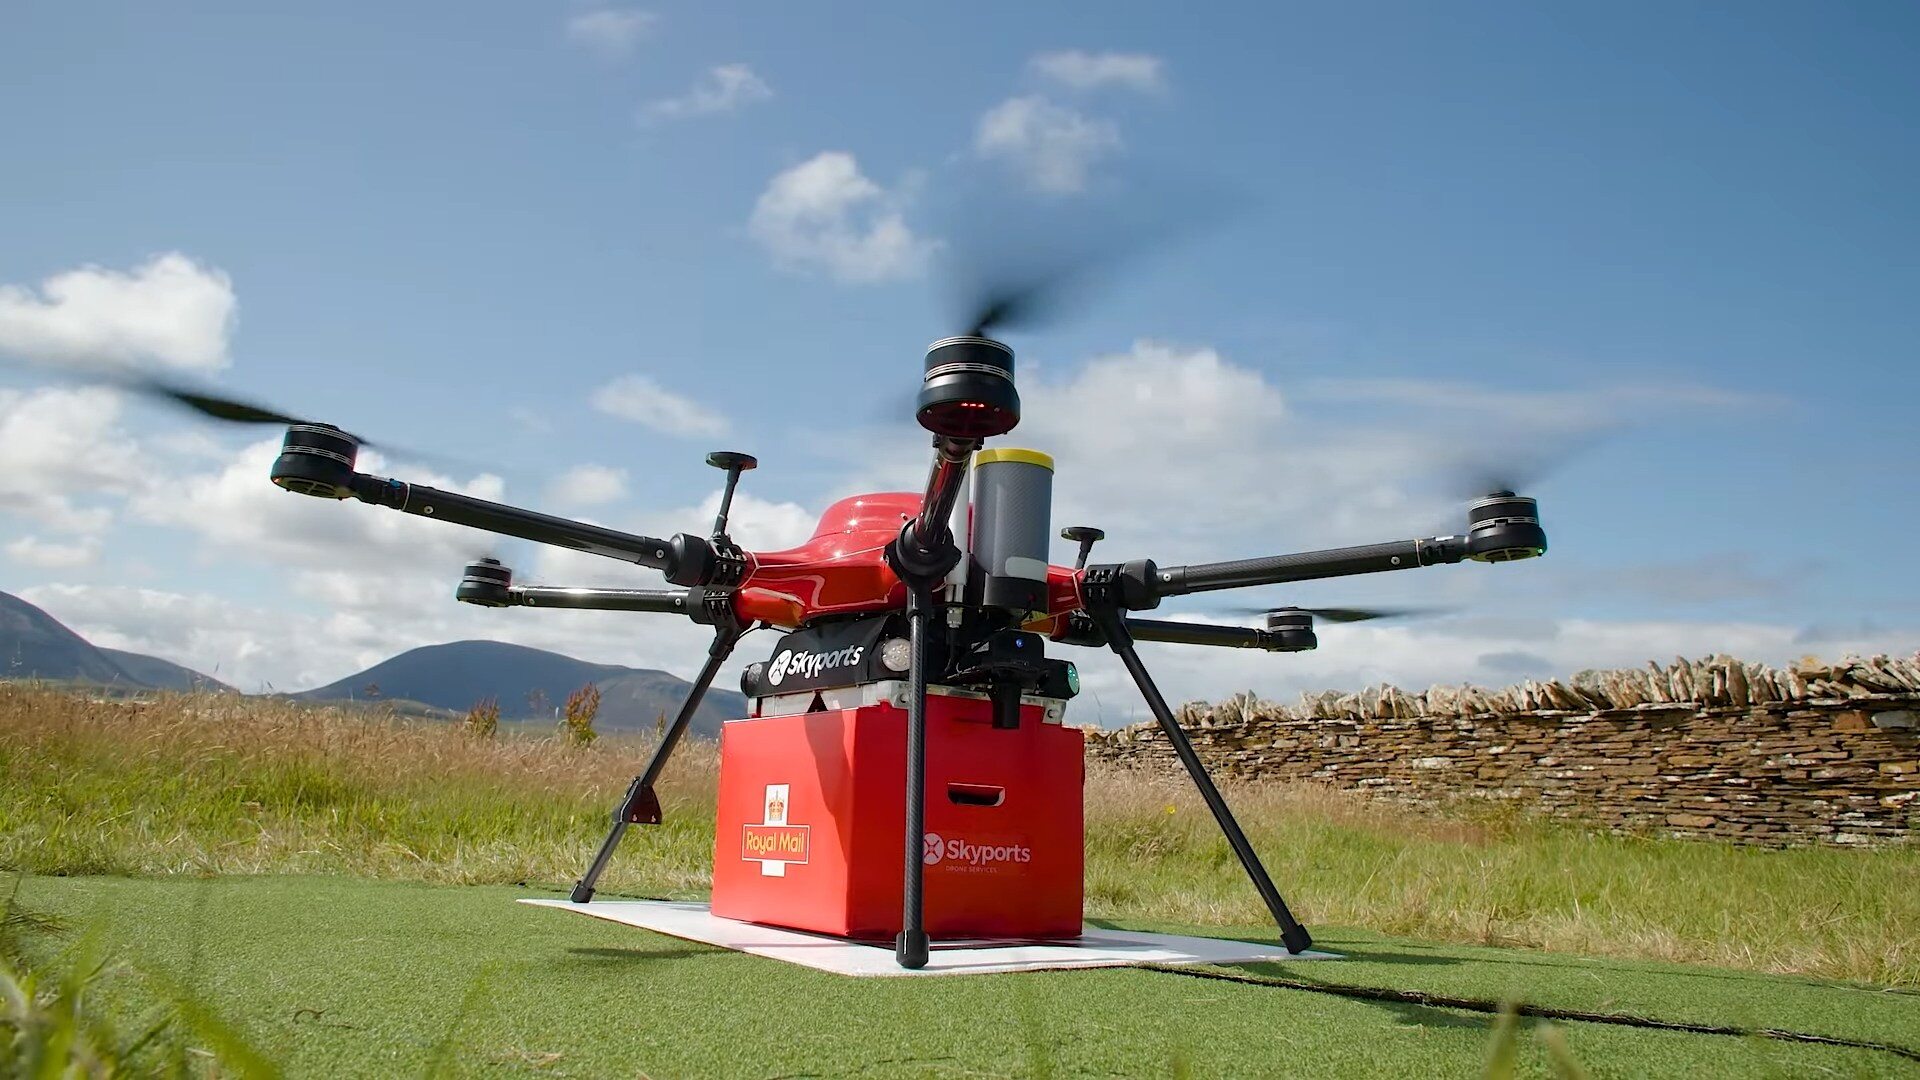 The British postman drone is already operational.  Delivers letters to the Scottish islands